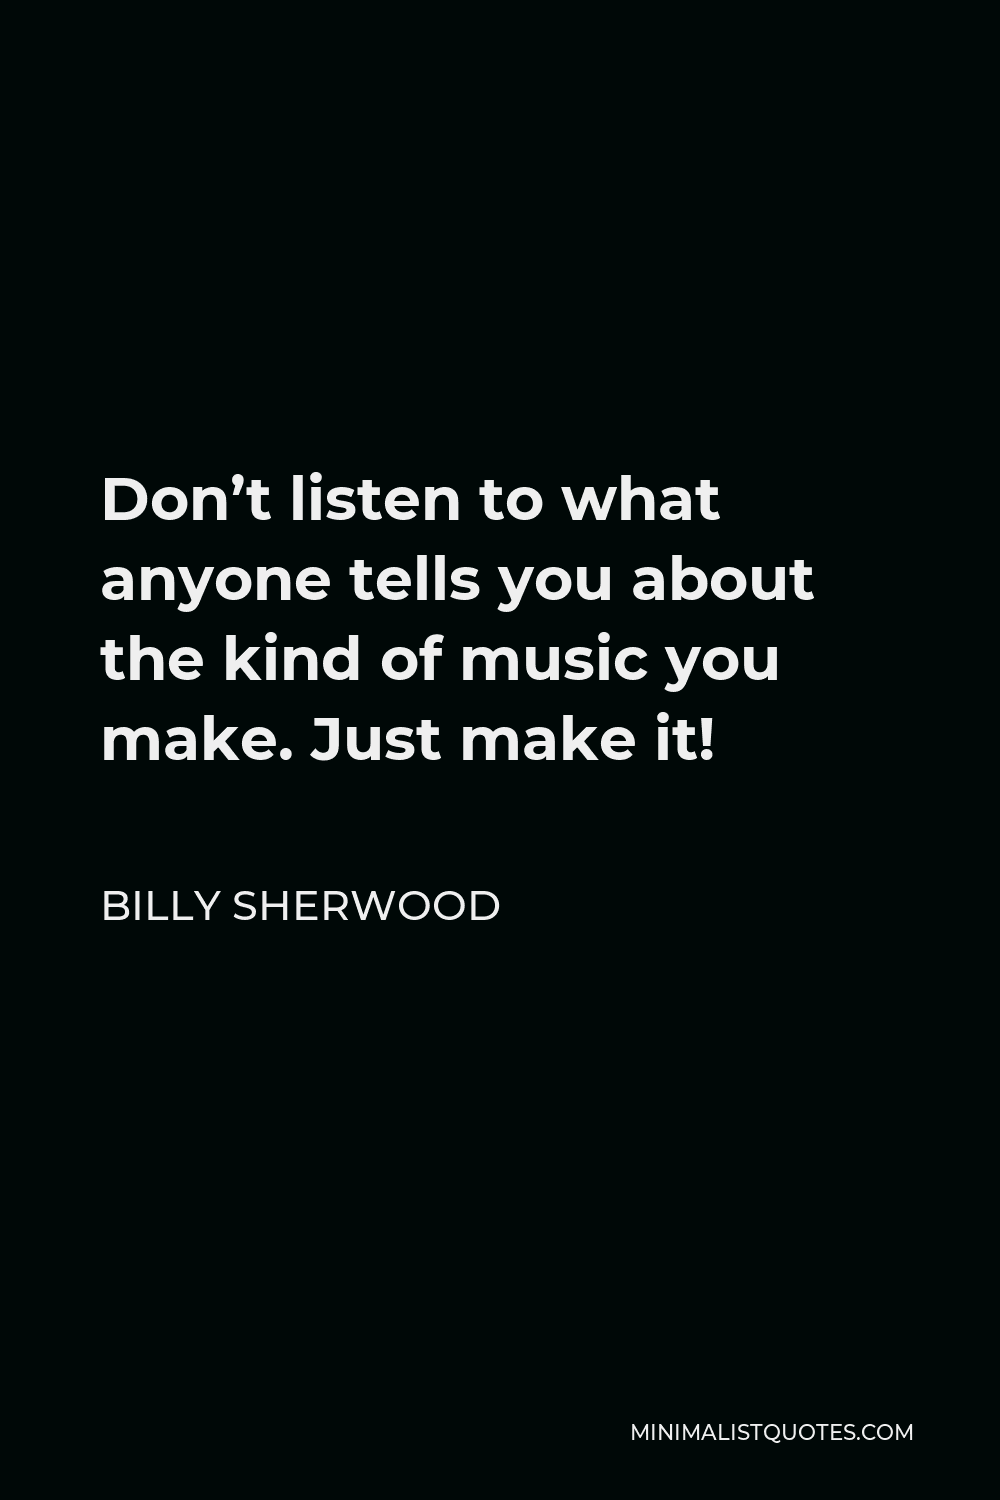 Billy Sherwood Quote - Don’t listen to what anyone tells you about the kind of music you make. Just make it!